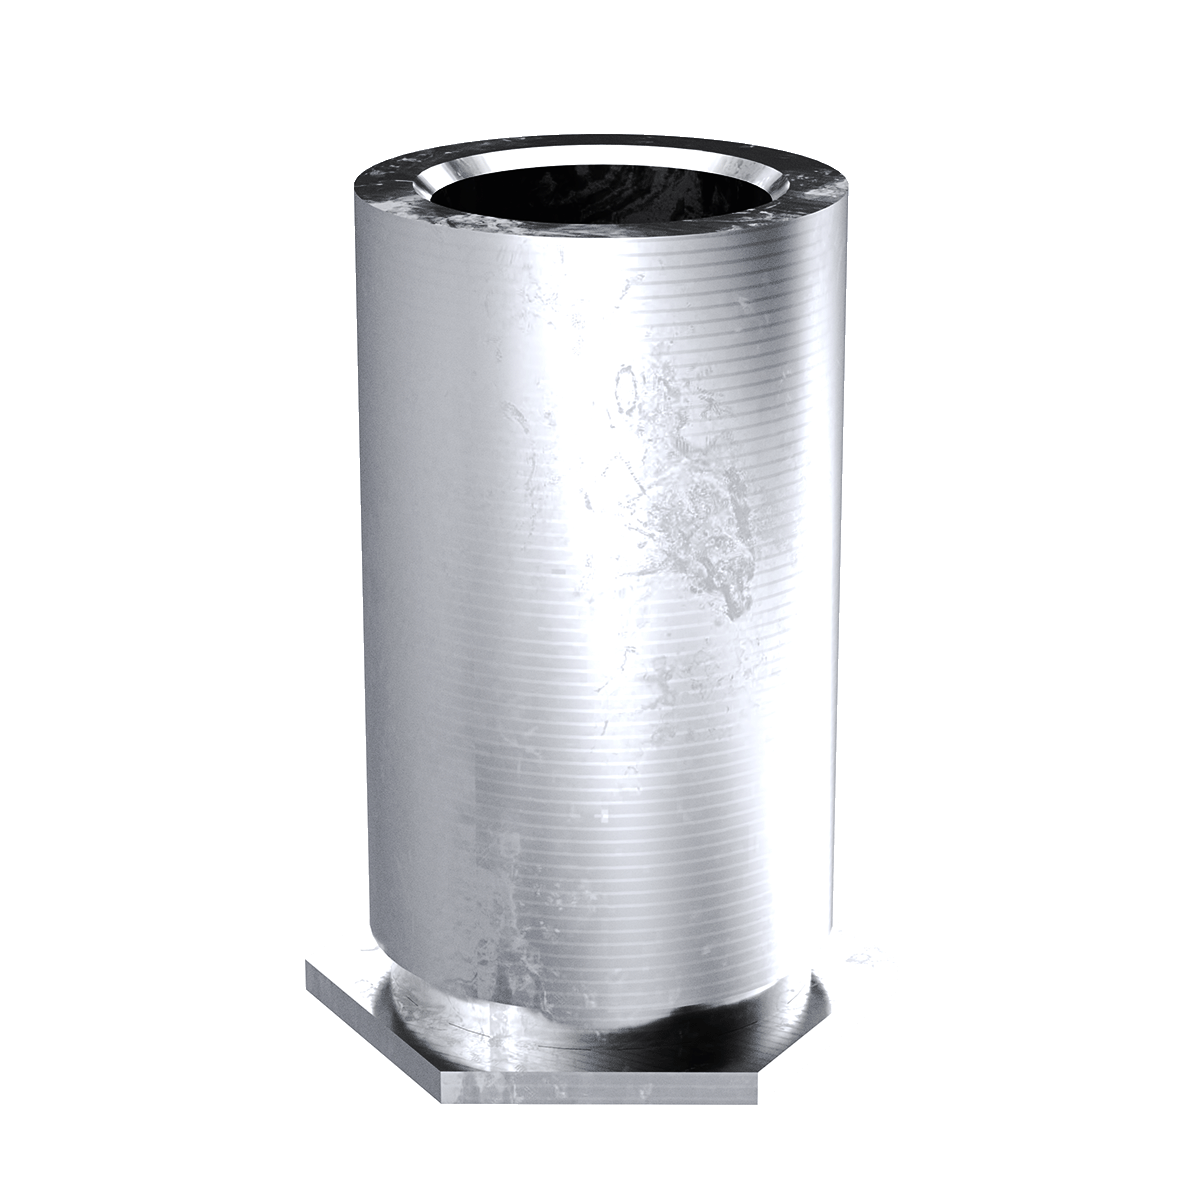 Self-Clinching Standoff, Through Unthreaded, 300 Series Stainless Steel, Passivated, 3.1 x 12, 100 Pack